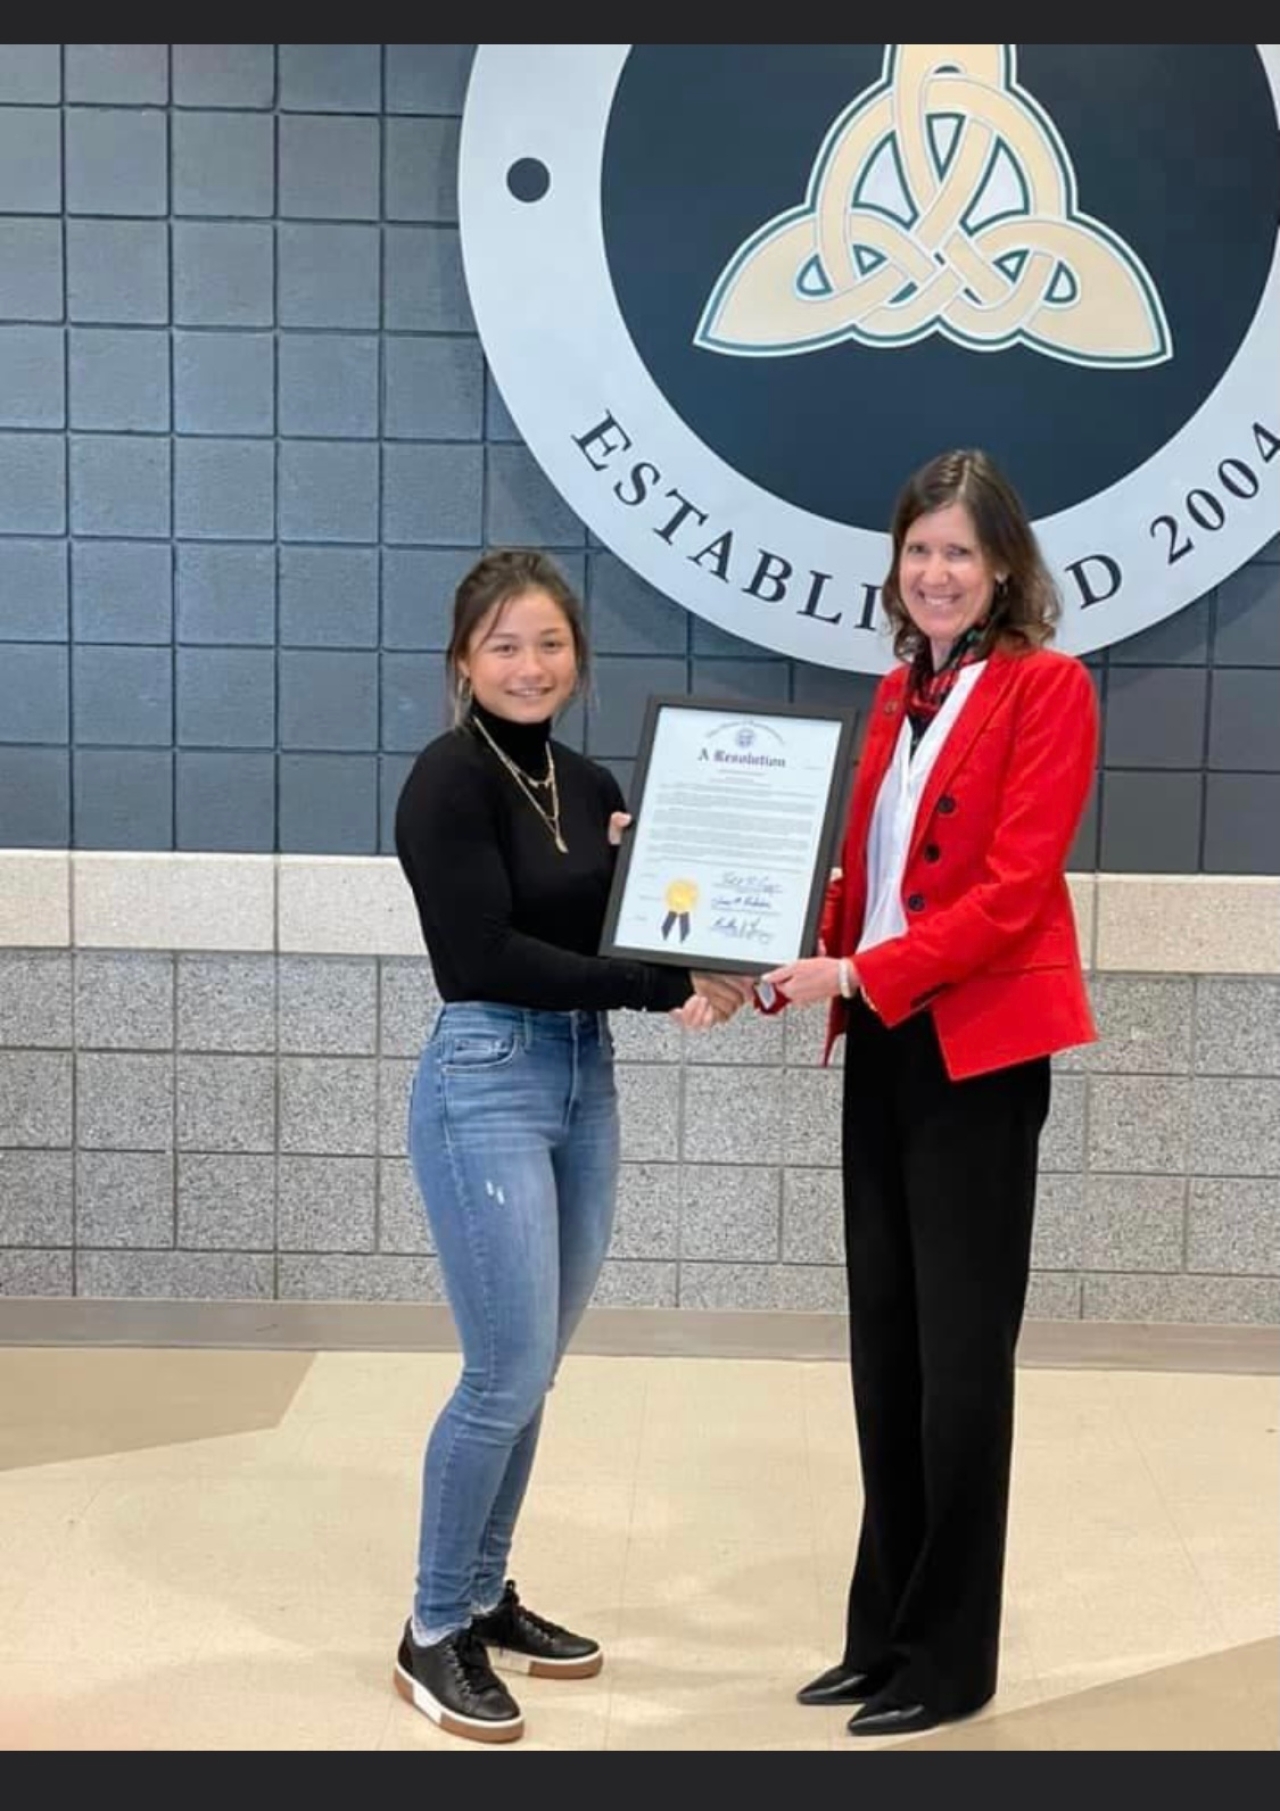 Representative Richardson presents Audrey Ryu with a resolution for her achievements in high school women's golf. Audrey is the 2021 Division 1 State Champion